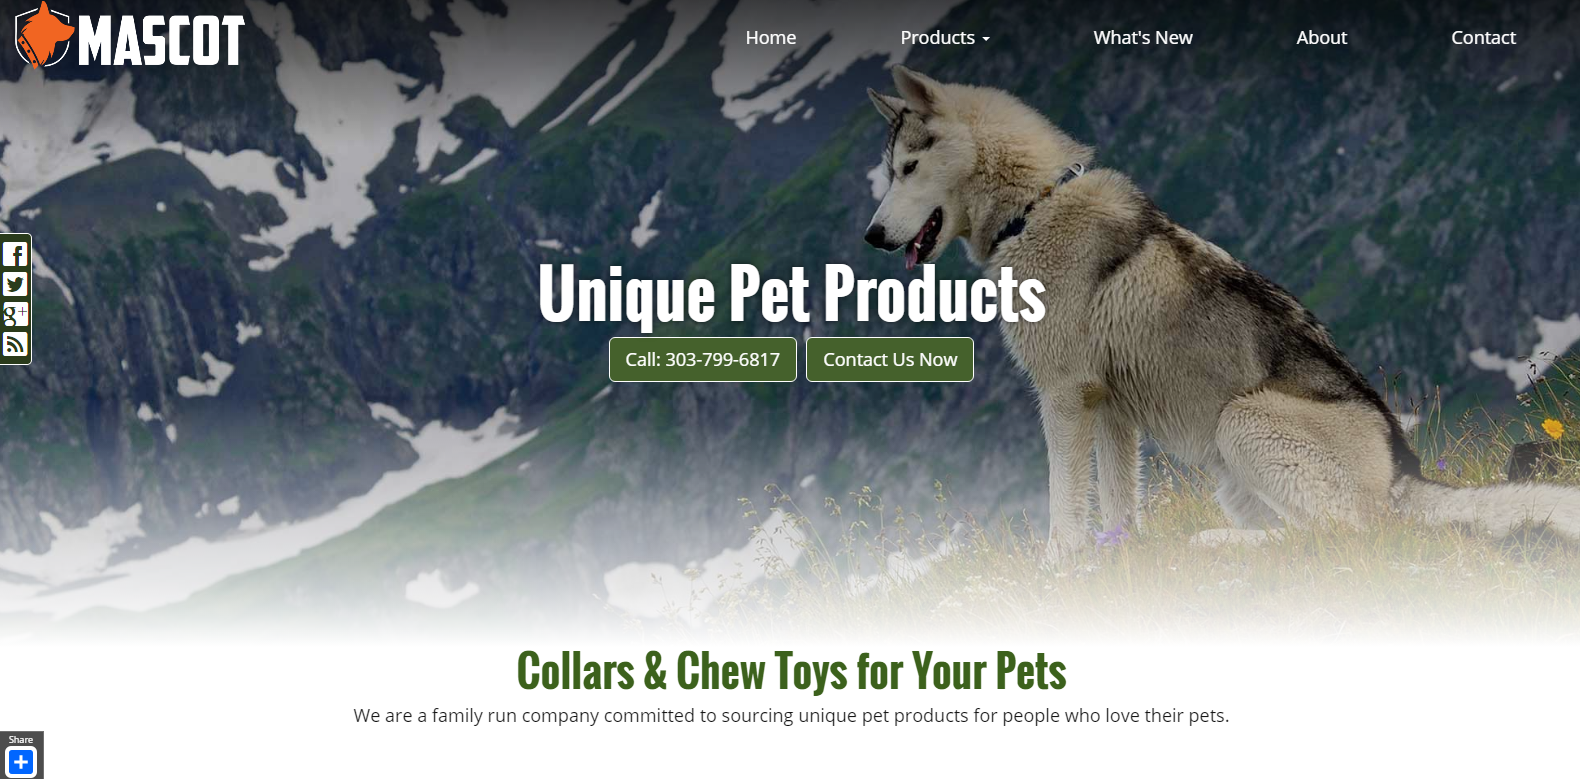 
New Website Launched: Mascot Pet Products